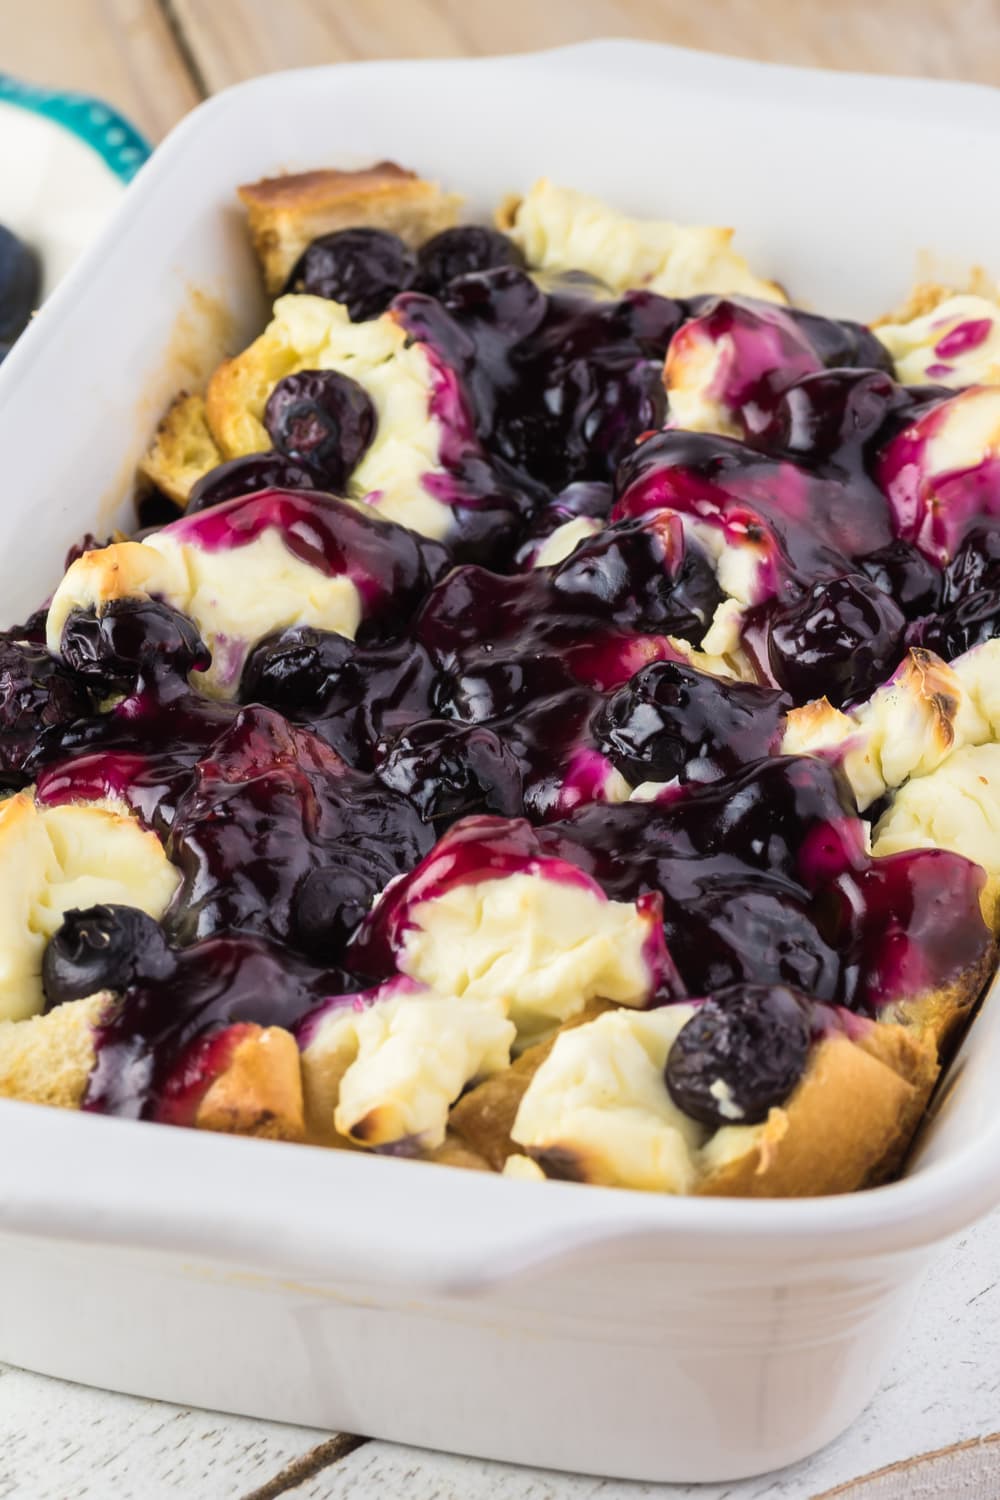 Breakfast Casserole full of blueberries, cream cheese, bread, and maple syrup